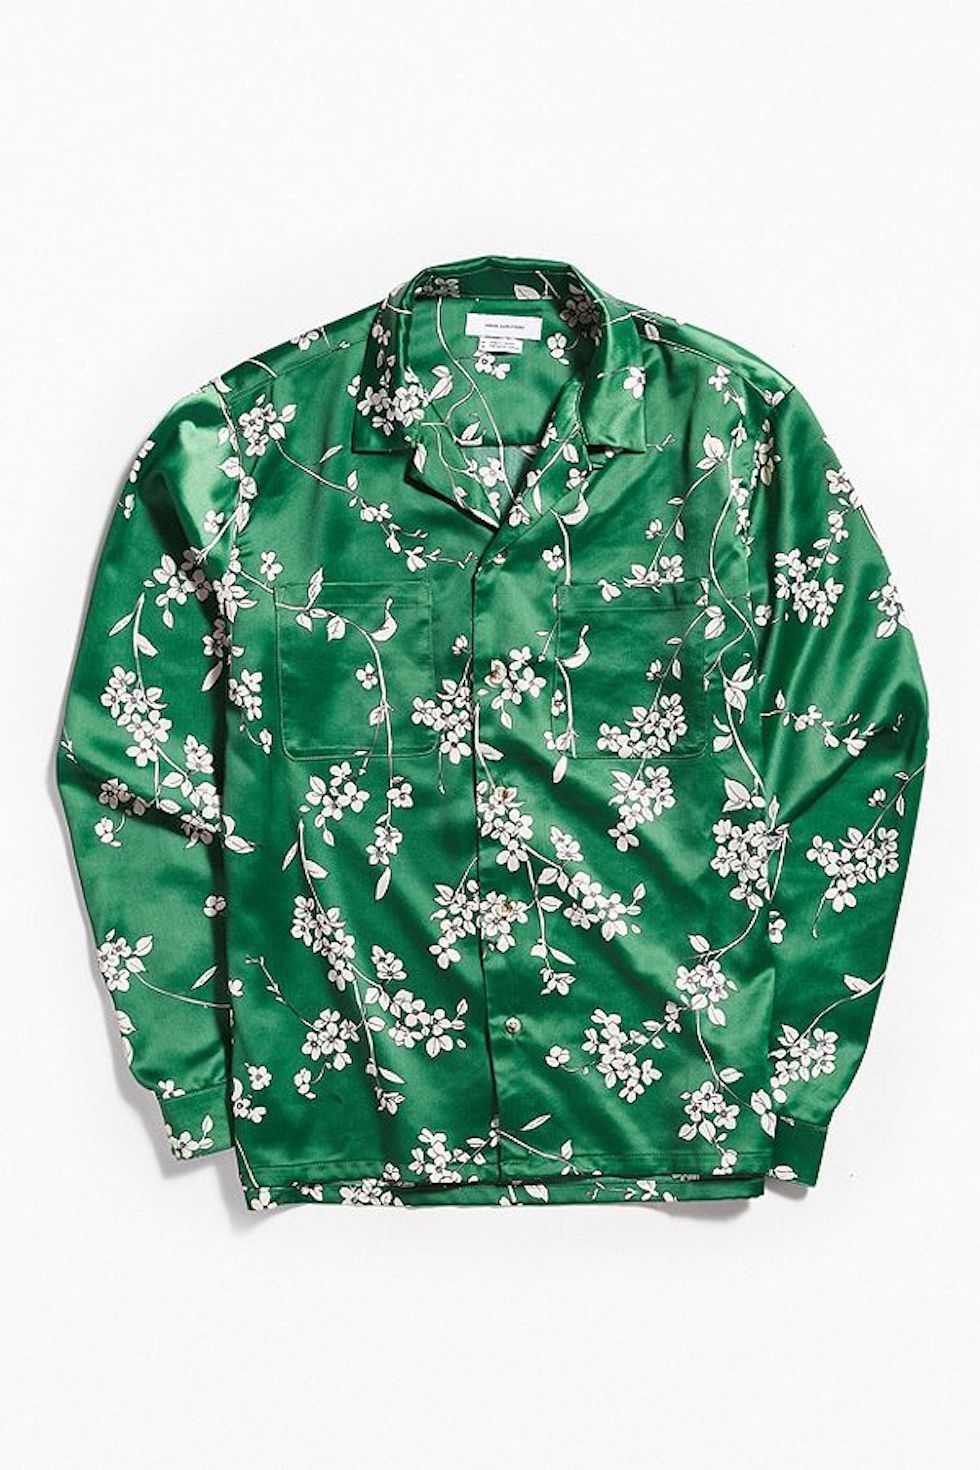 Urban Outfitters Floral Satin Button-Down Shirt